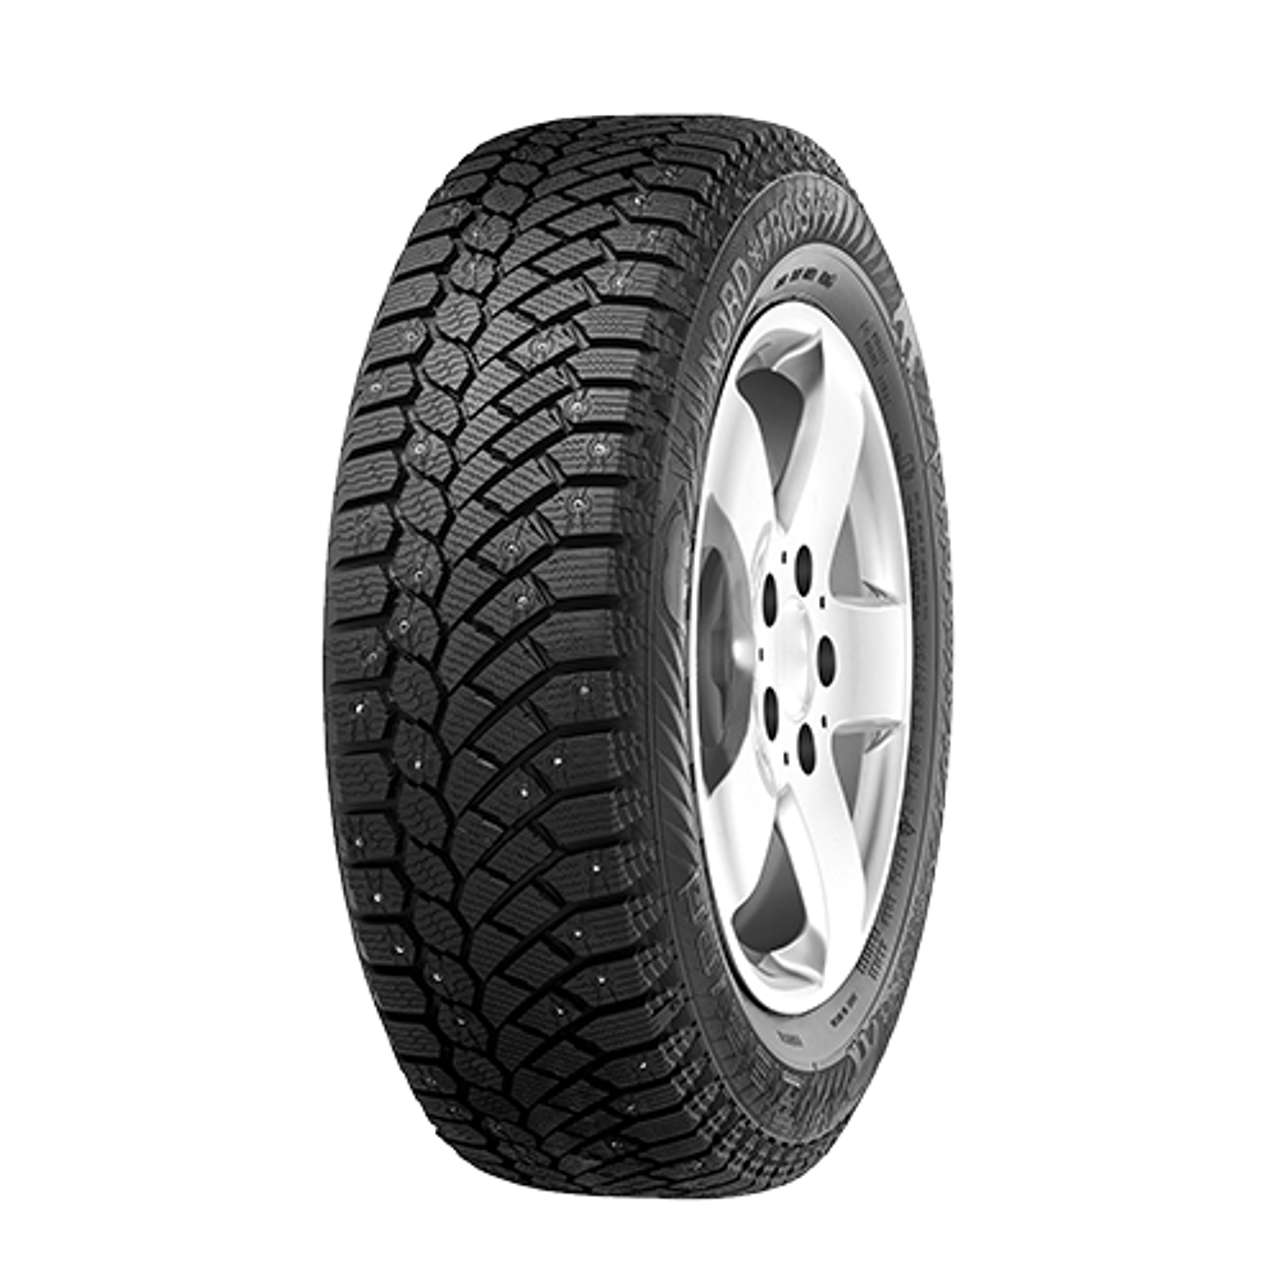 GISLAVED NORD*FROST 200 225/45R17 94T STUDDABLE FR BSW von GISLAVED